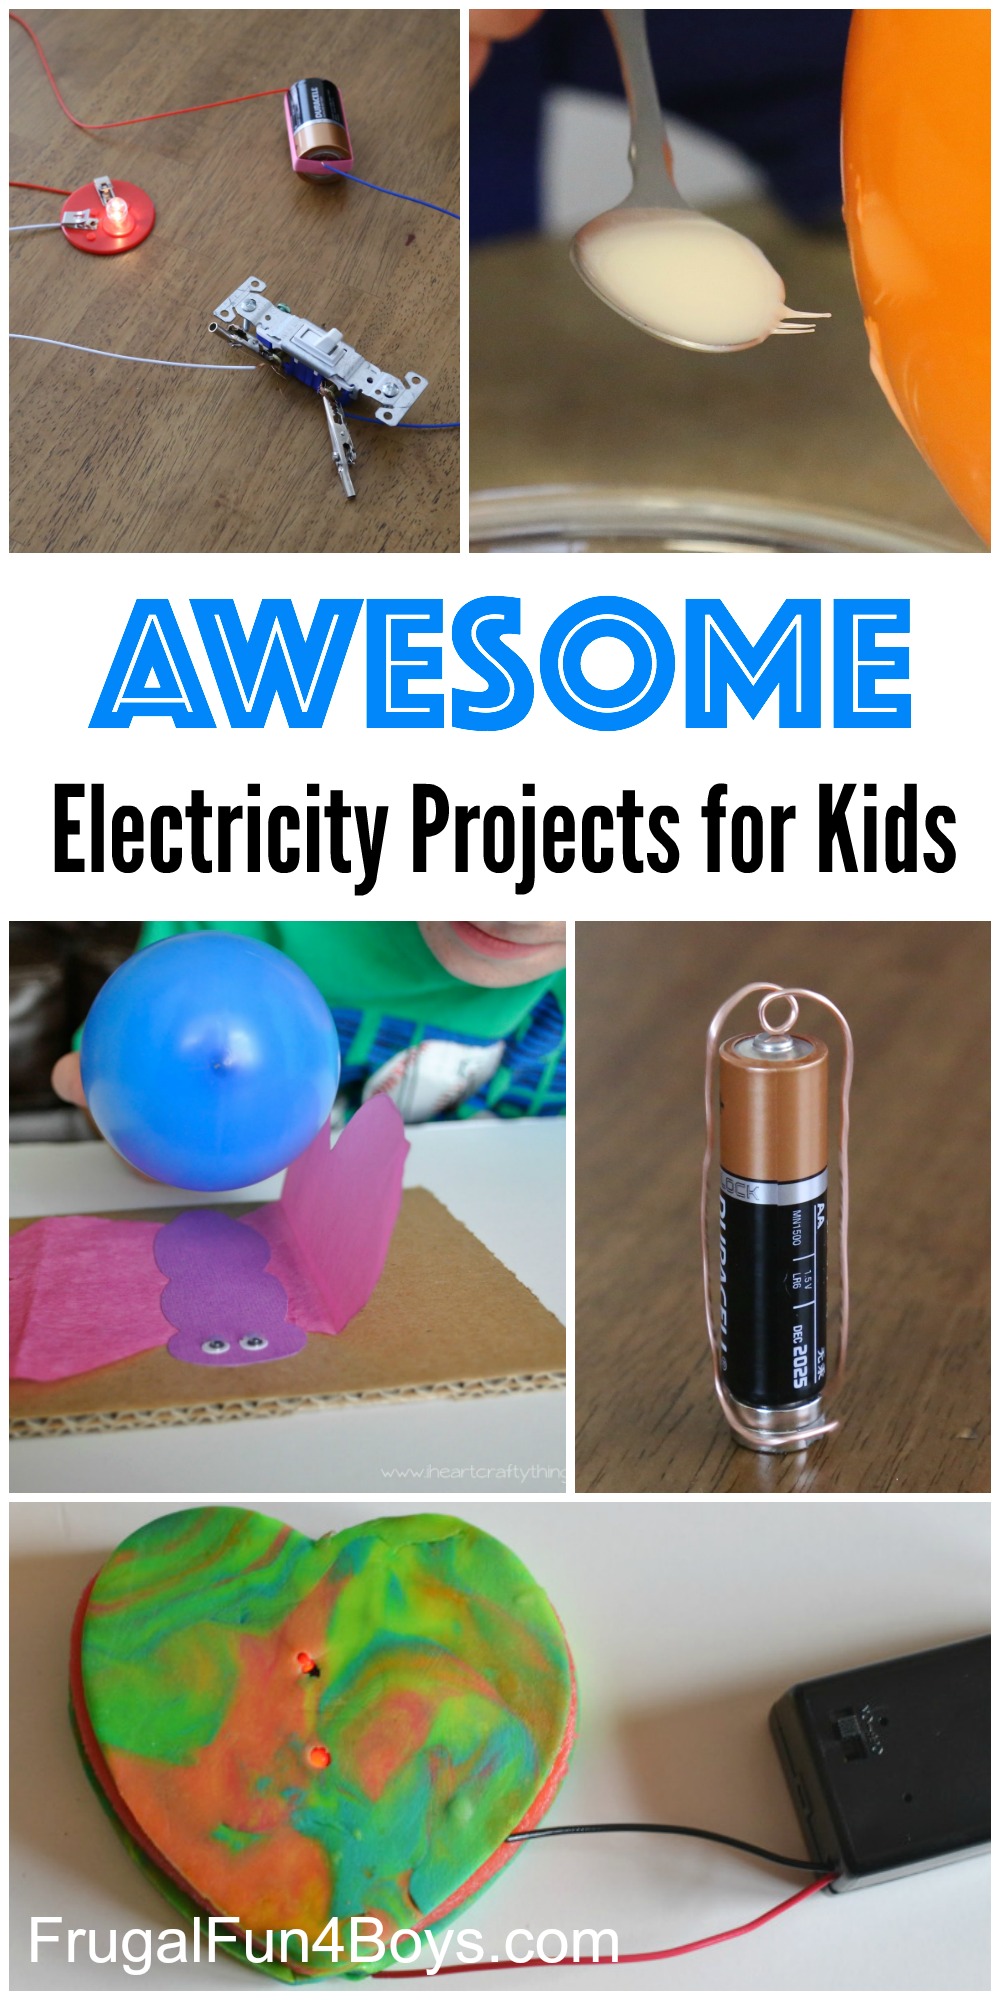 10 Awesome Electricity Projects for Kids - Frugal Fun For Boys and Girls